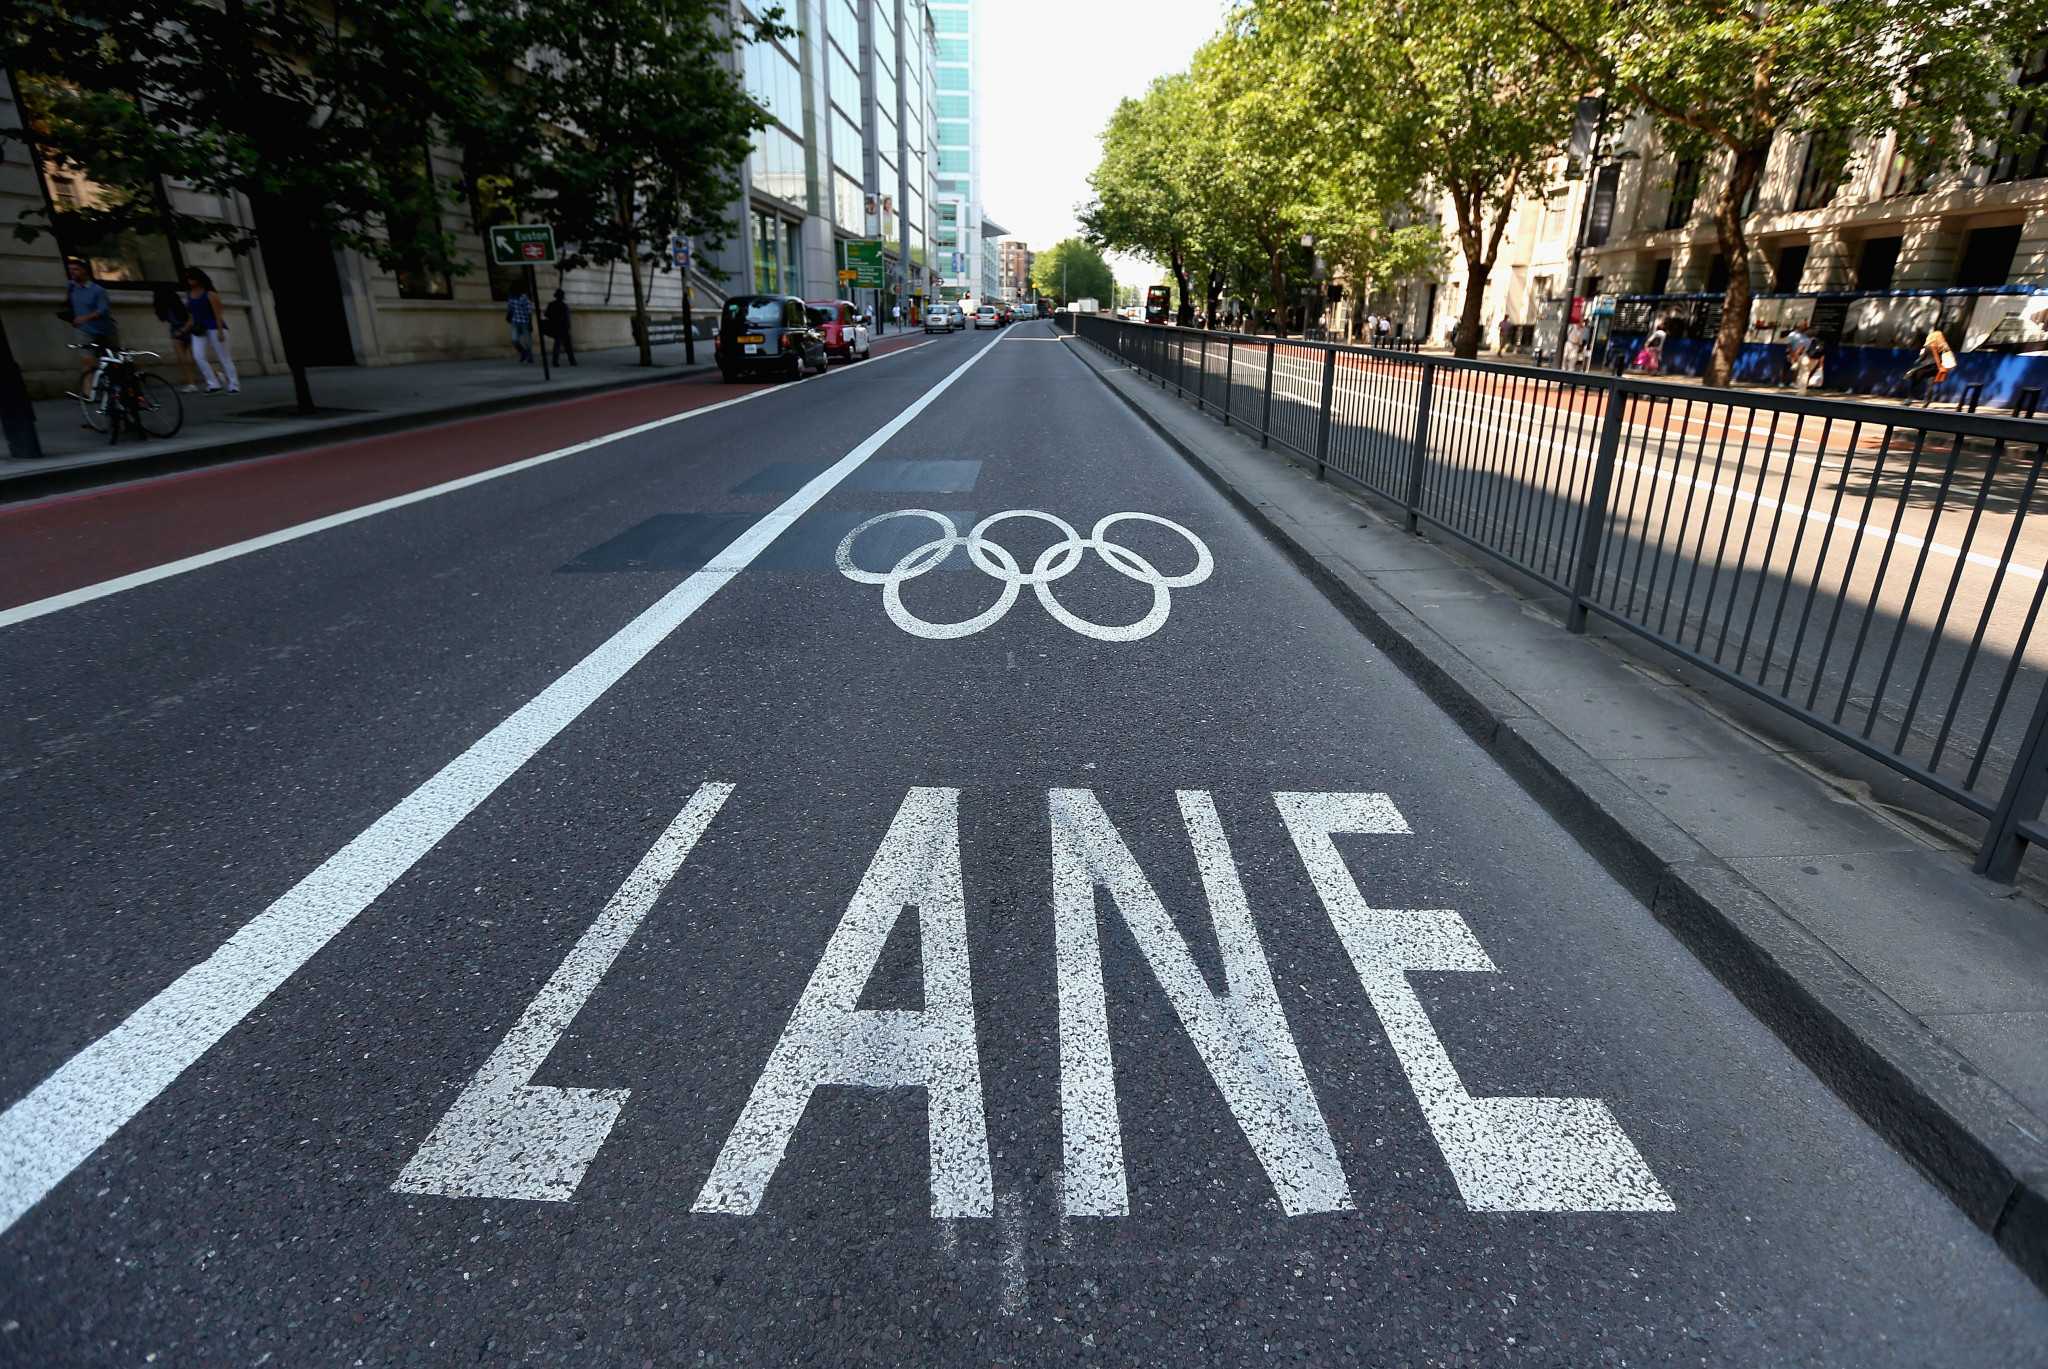 Paris Mayor's office to amend plans for use of ring road after Olympics